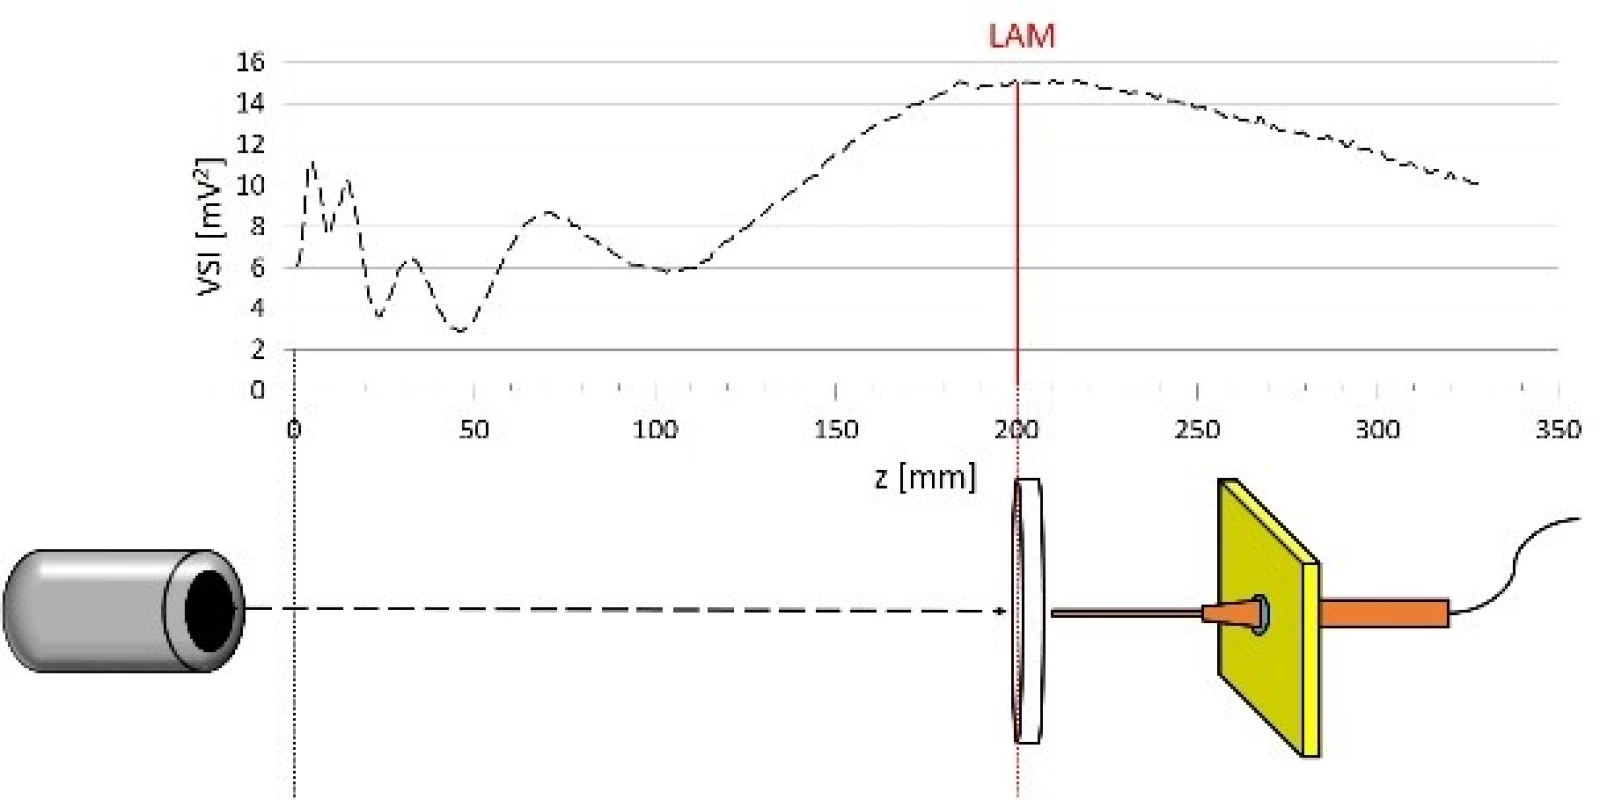 Experimental set-up shown in correlation with ultrasound field distribution along z axis. LAM: last axial maximum.